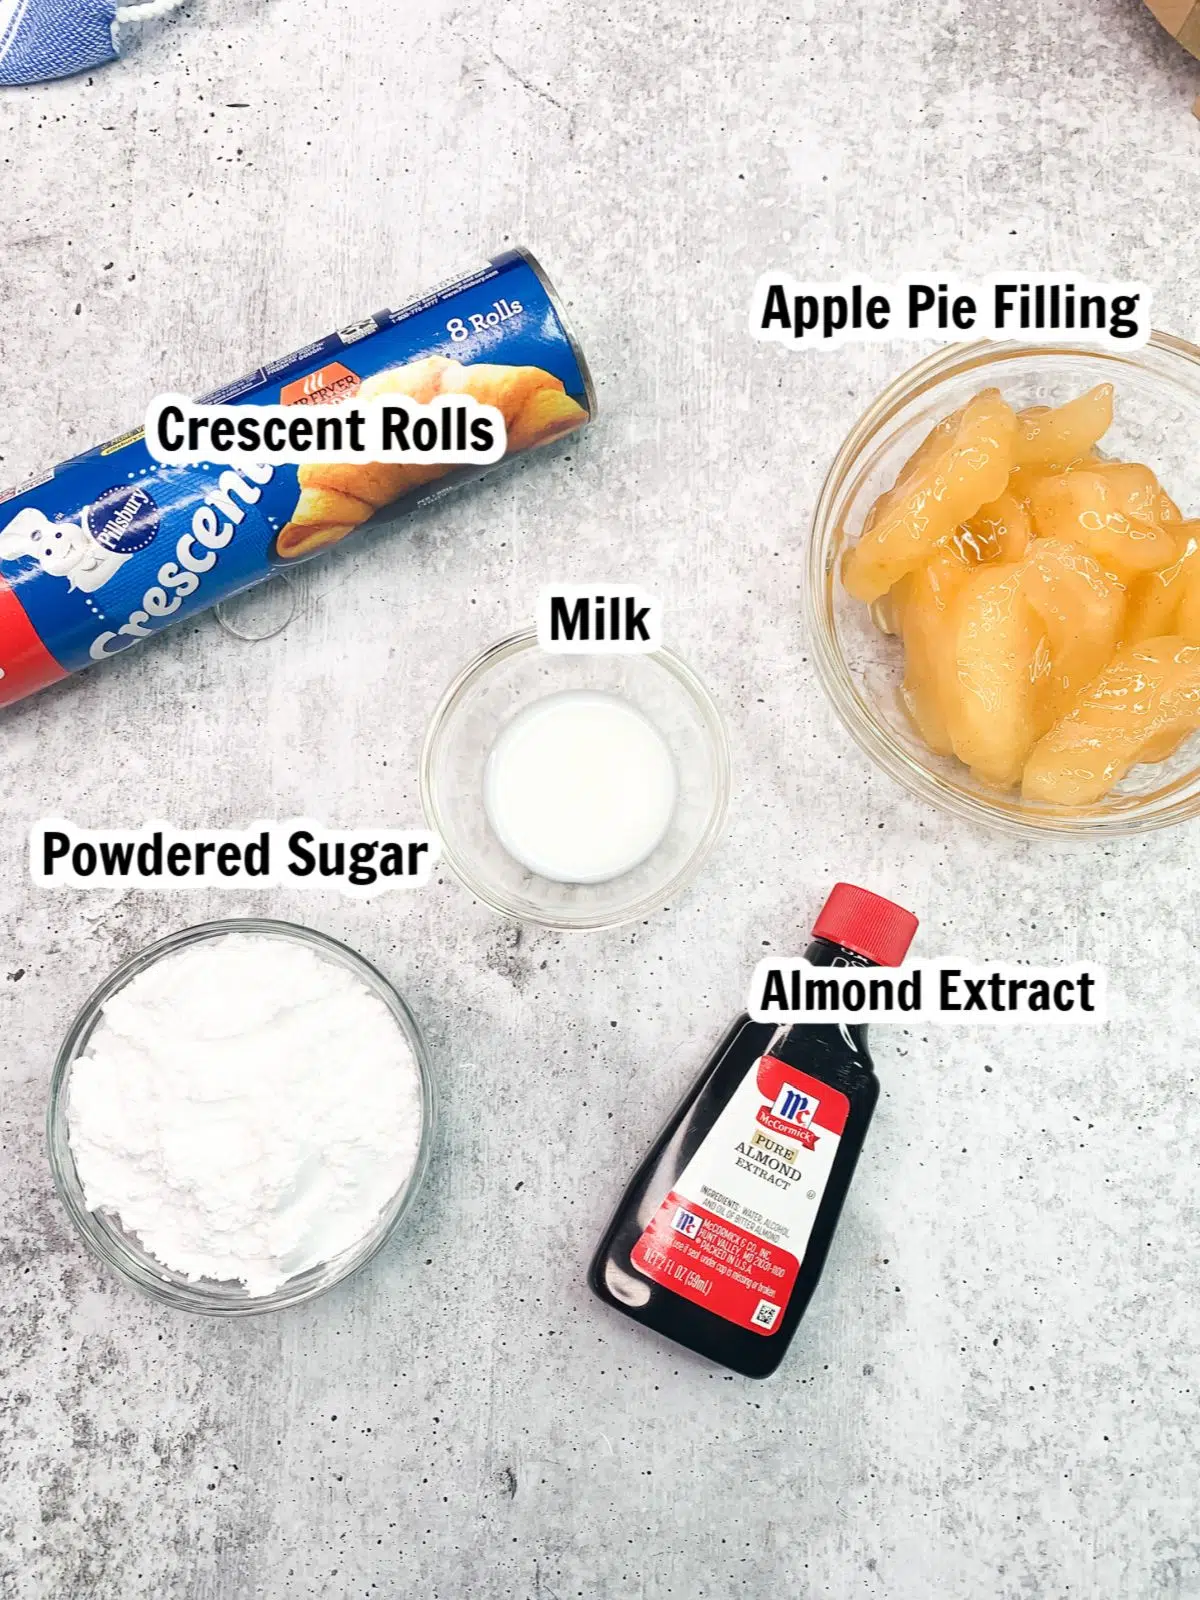 Ingredients crescent rolls, apple pie filling, powdered sugar, almond extract.